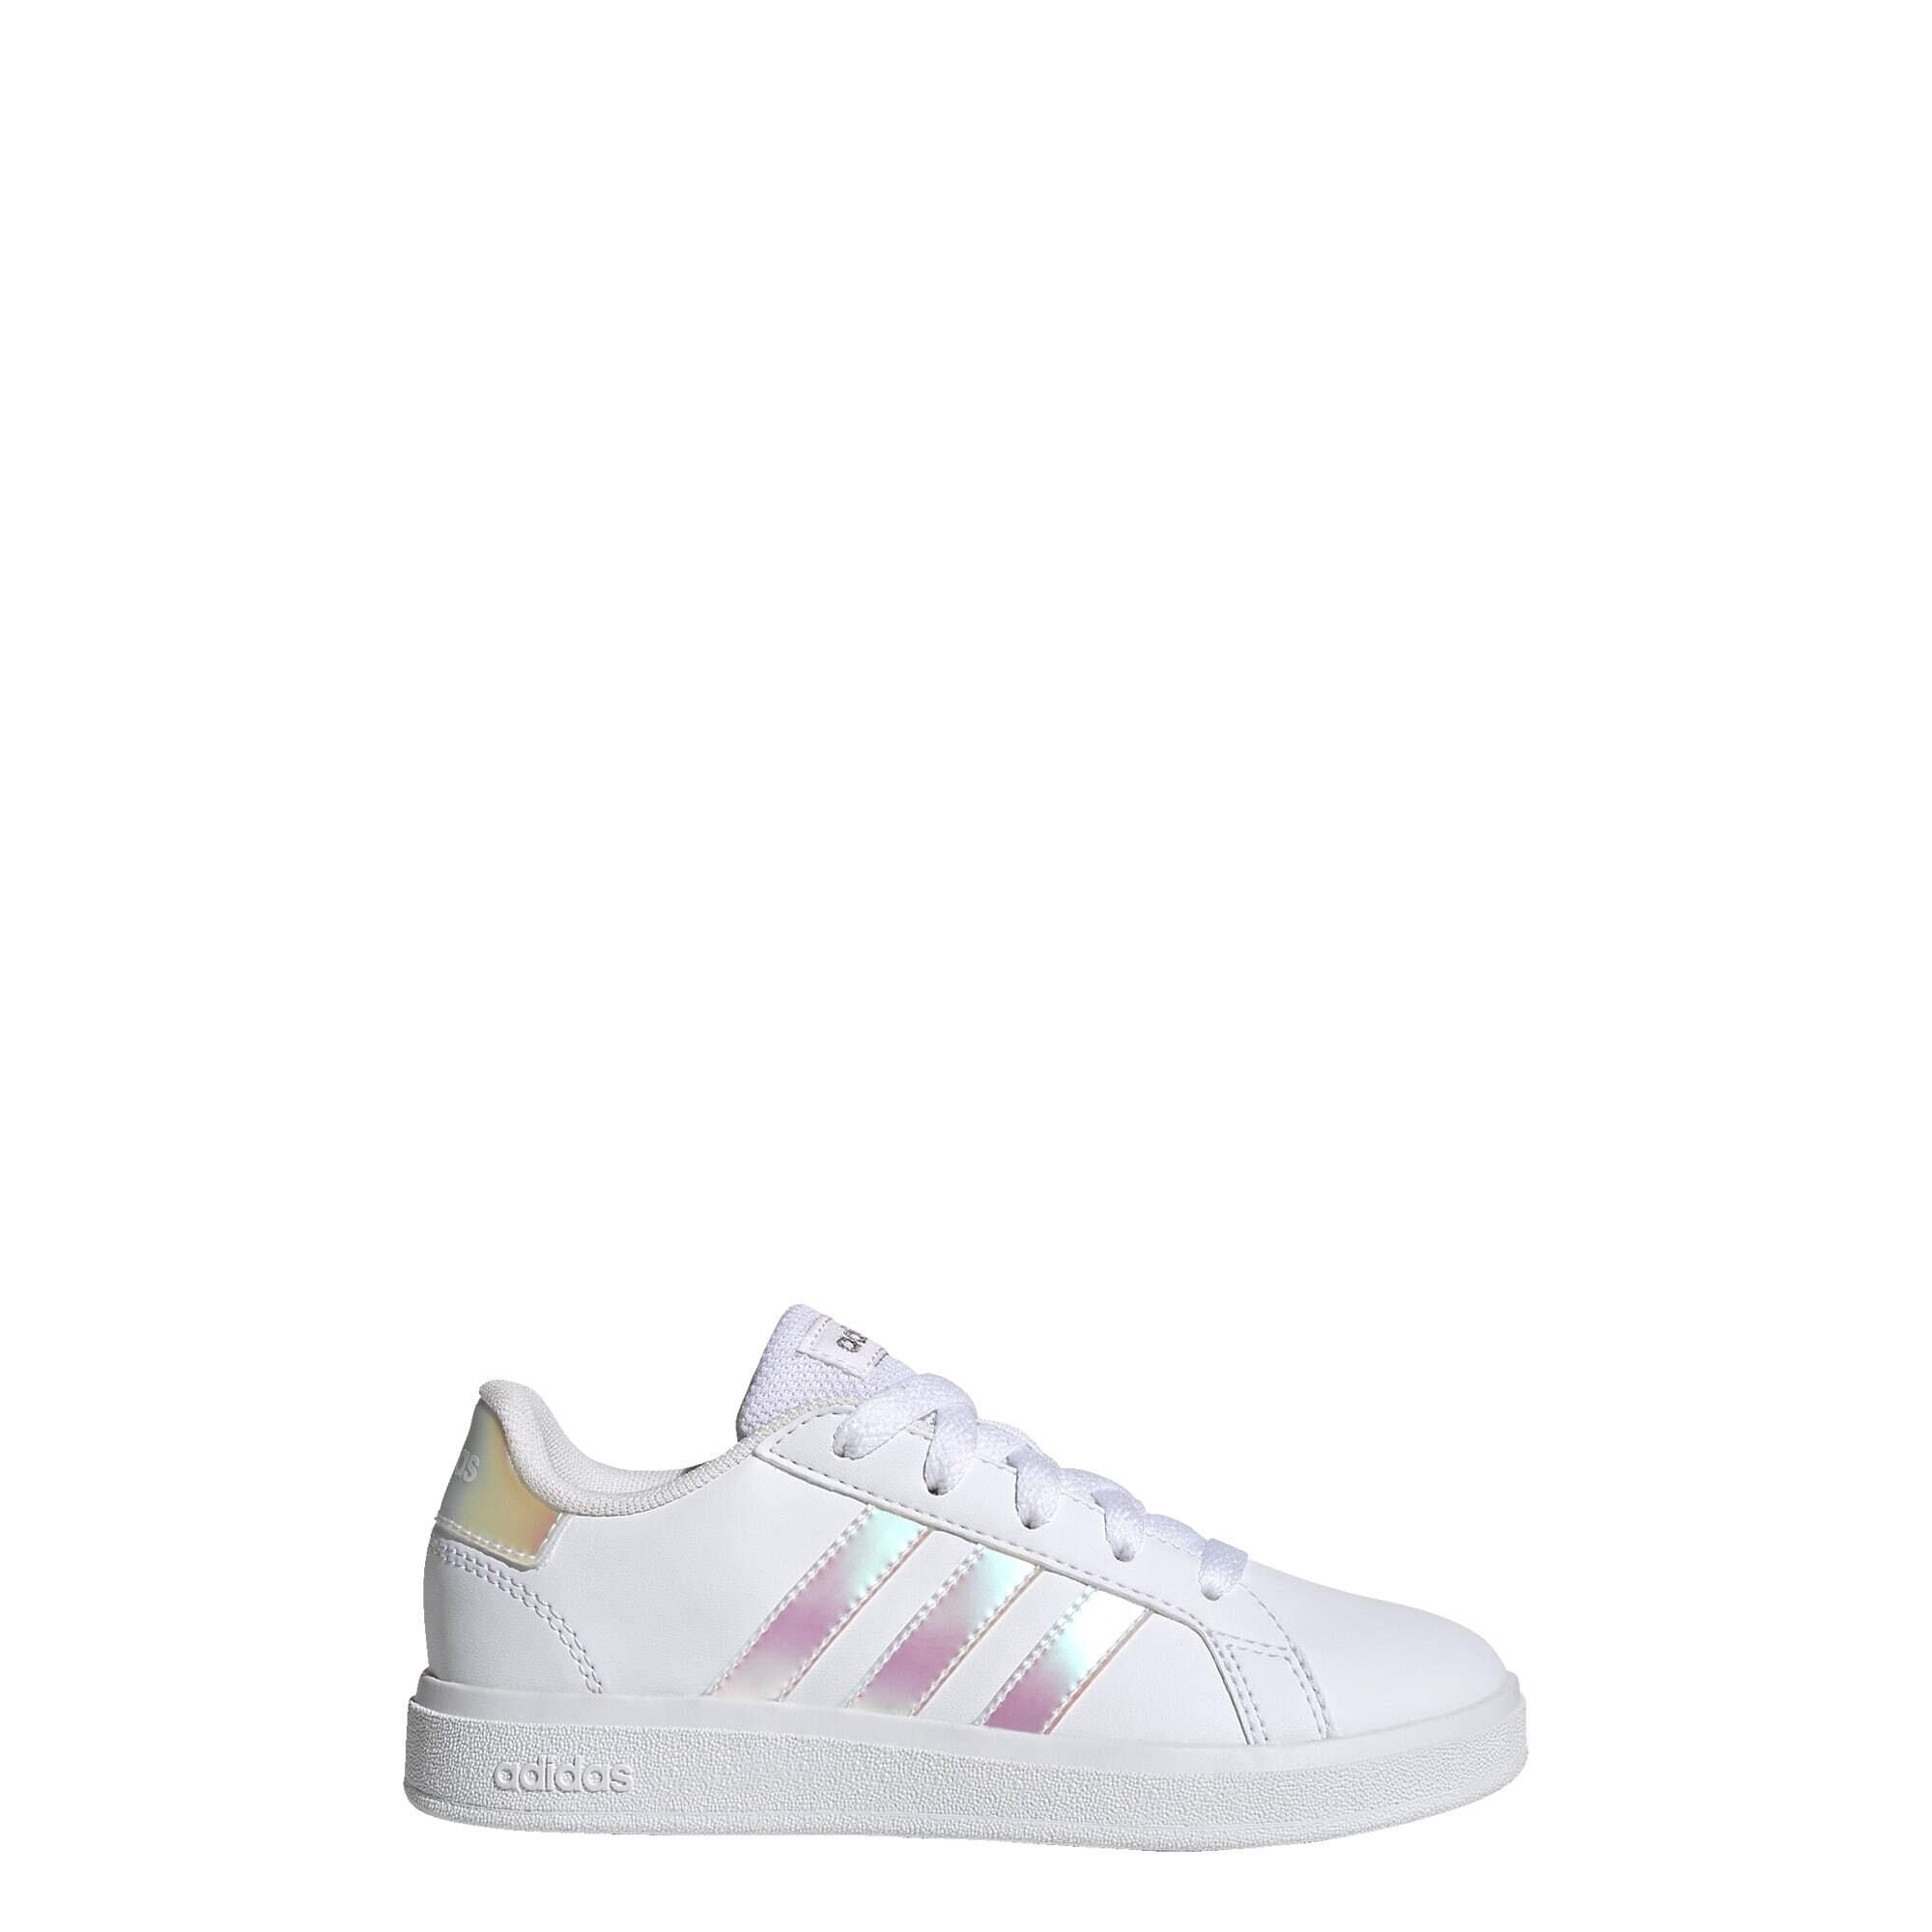 ADIDAS Grand Court Lifestyle Lace Tennis Shoes